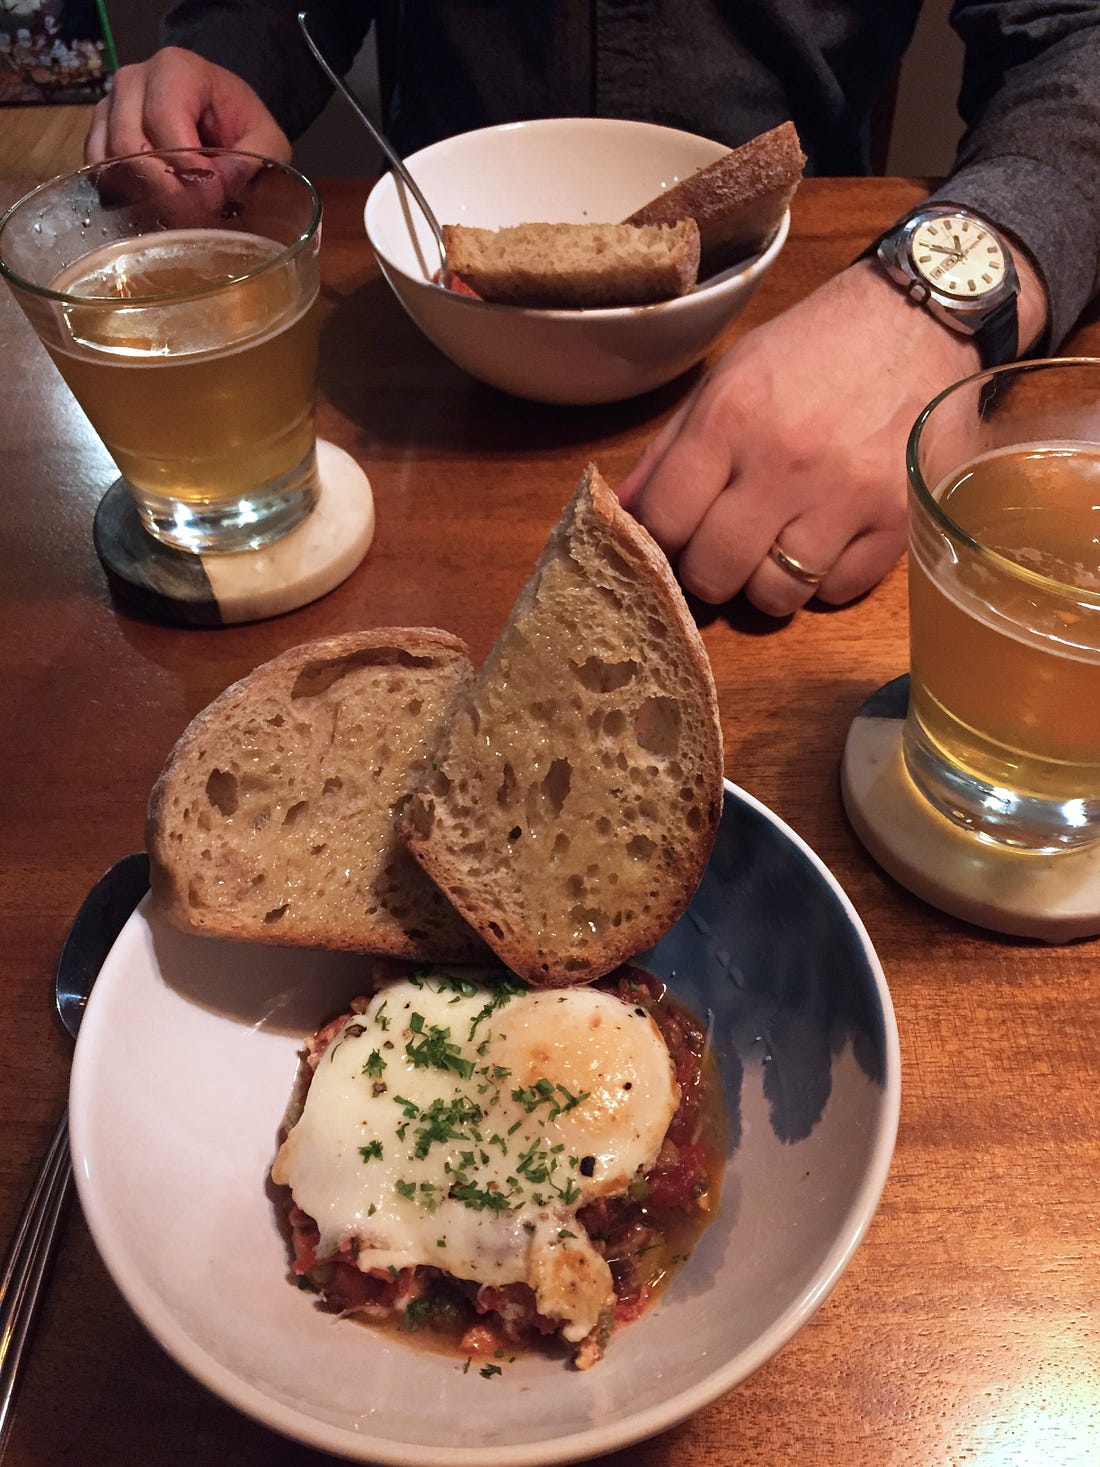 A table setting with two bowls of puttanesca, each with two slices of toast at the side and a poached egg and a sprinkle of parsley on top. Two glasses of beer sit on coasters to the sides of the bowls, and Jeff's hands are visible at the other side of the table.